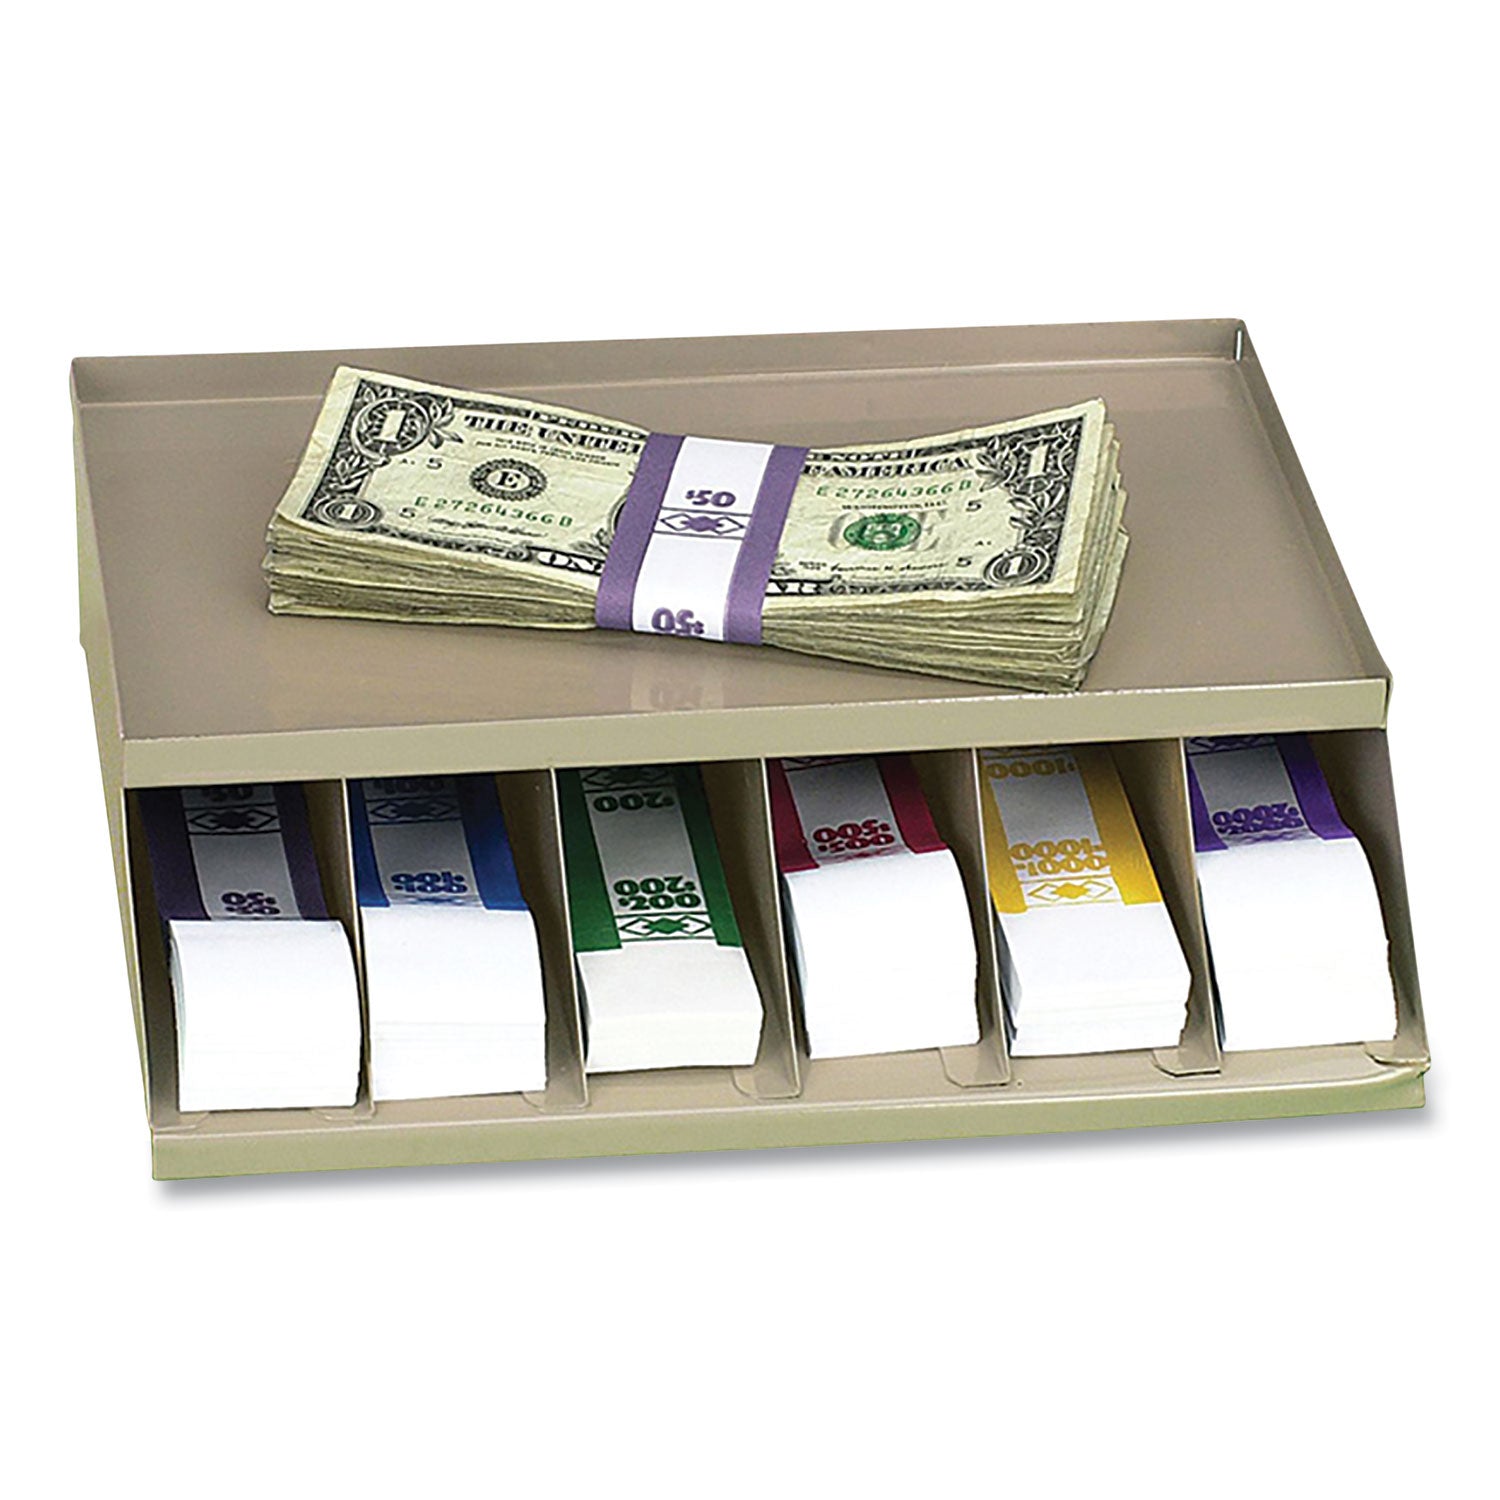 coin-wrapper-and-bill-strap-single-tier-rack-6-compartments-10-x-85-x-3-steel-pebble-beige_cnk500014 - 2